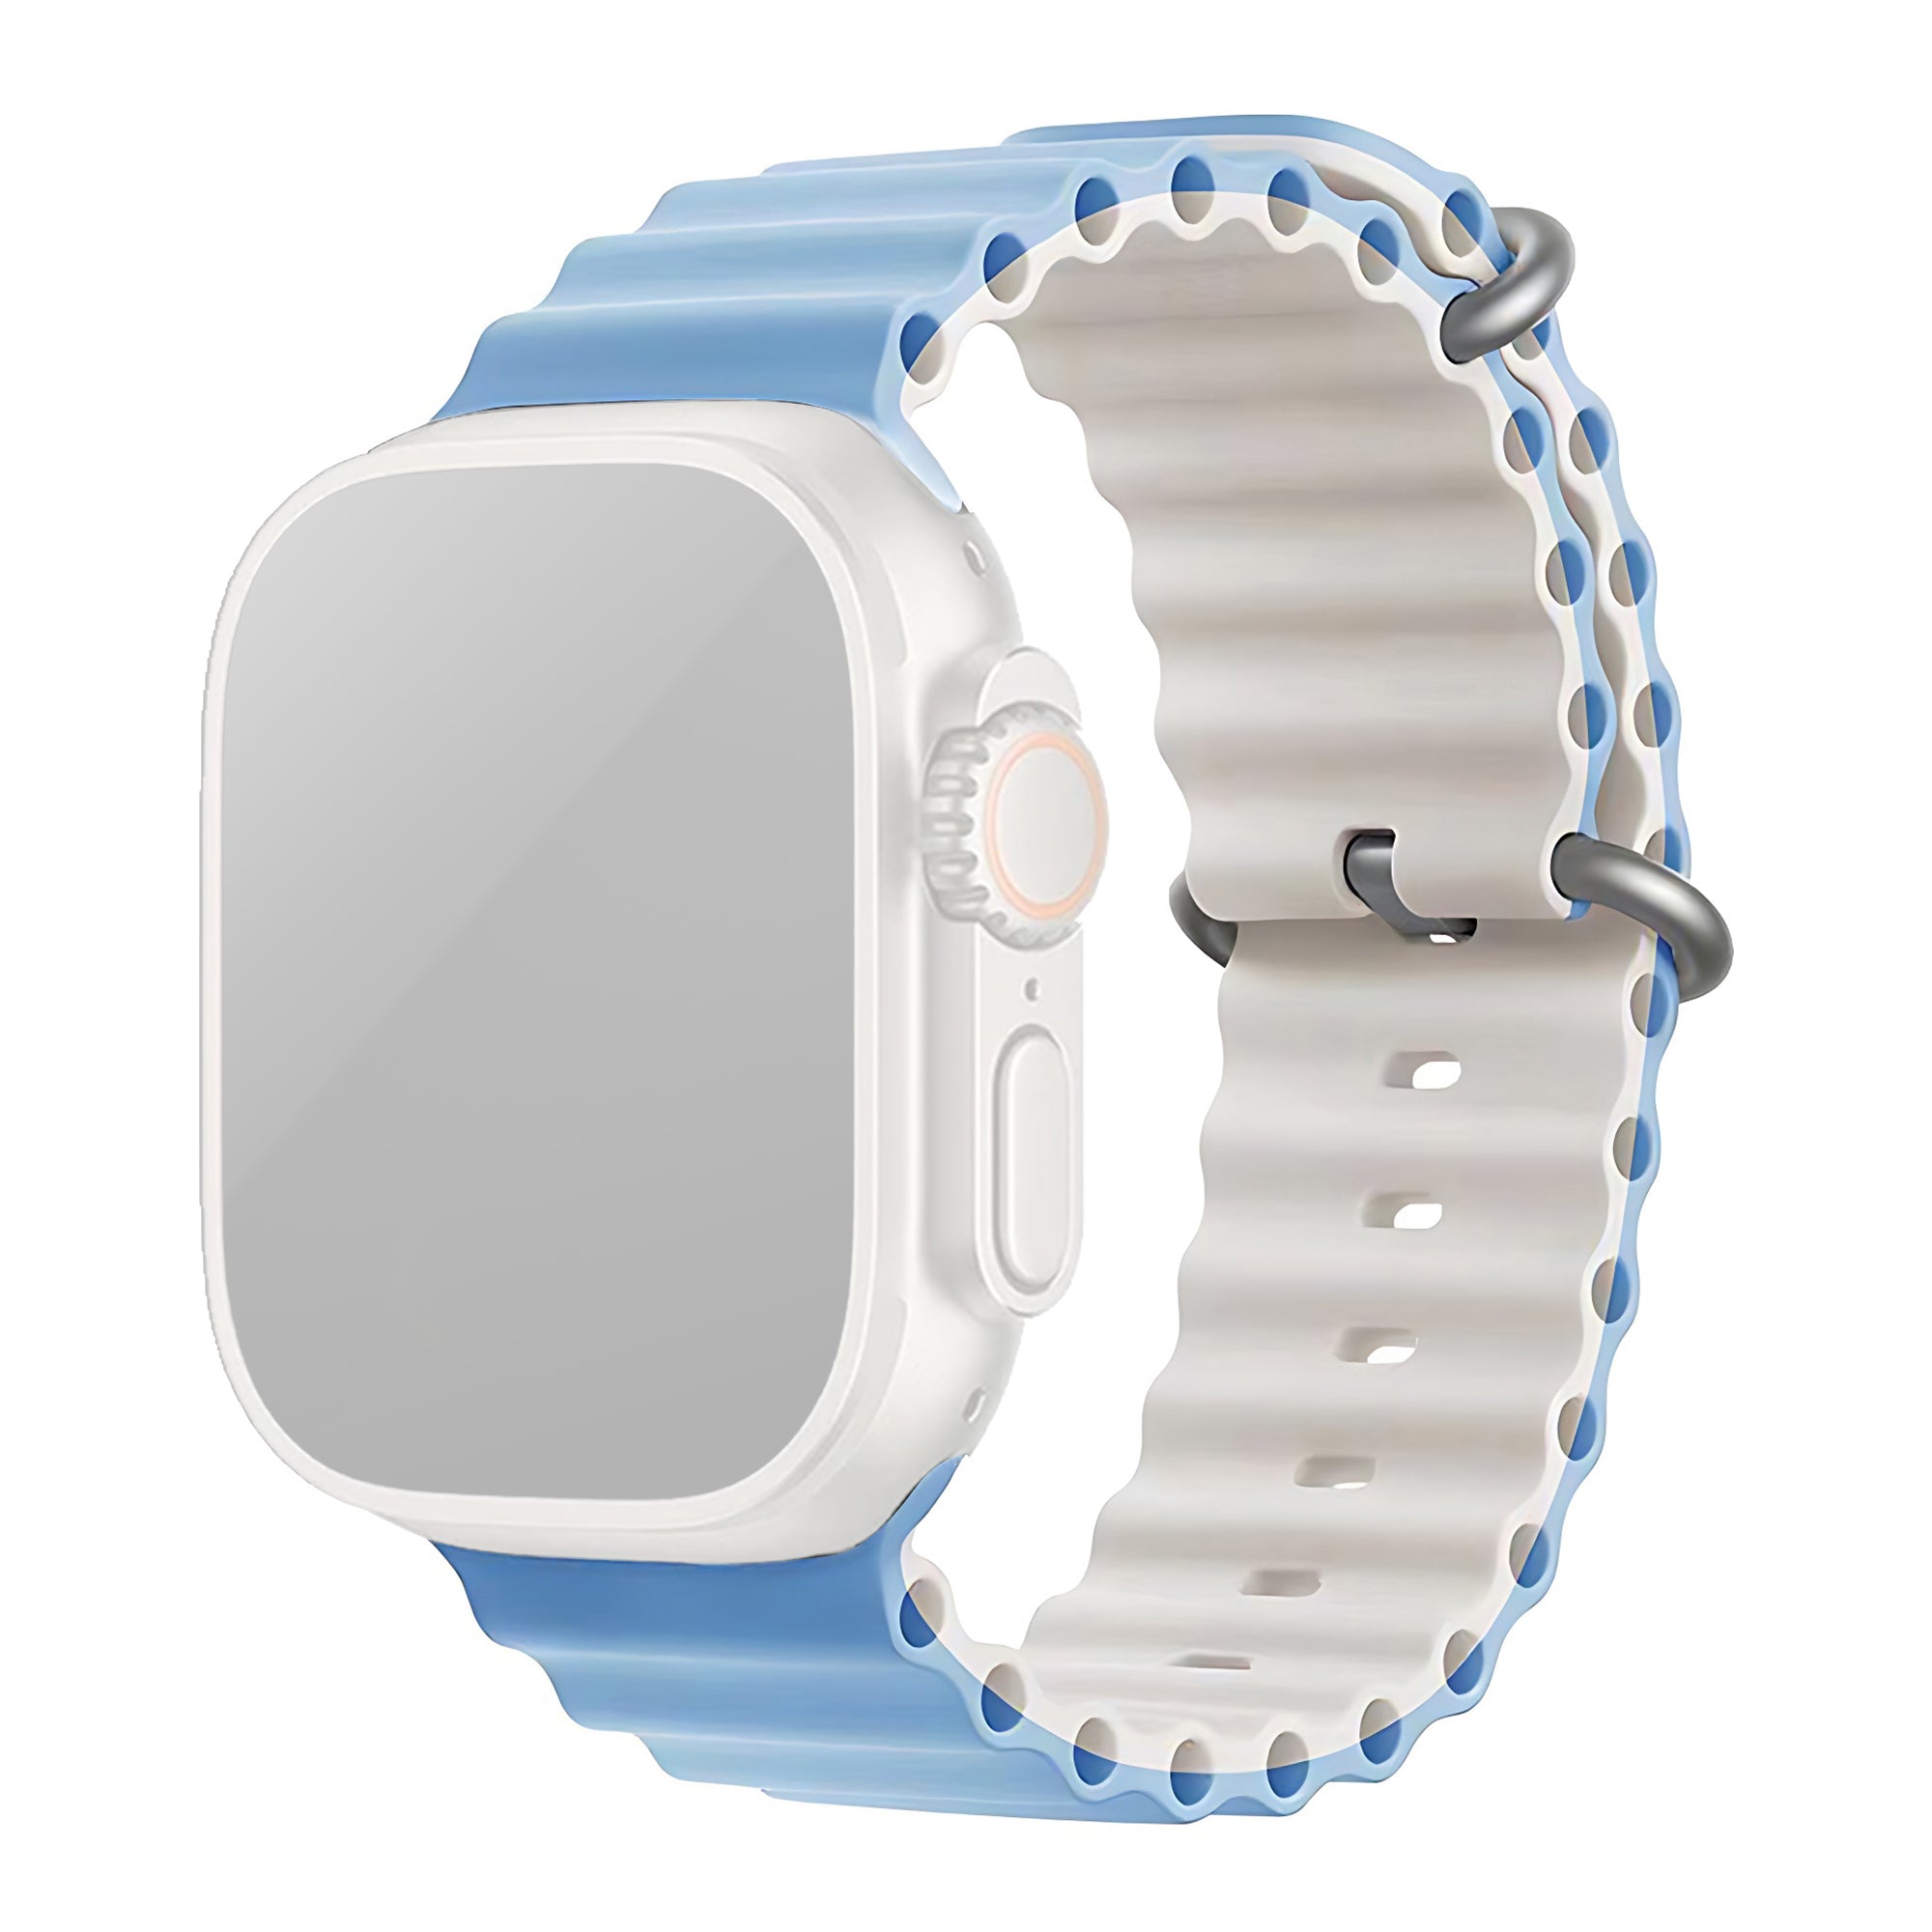 Silicone Ocean Loop Strap for - Apple Watch 49mm - Blue & Gray